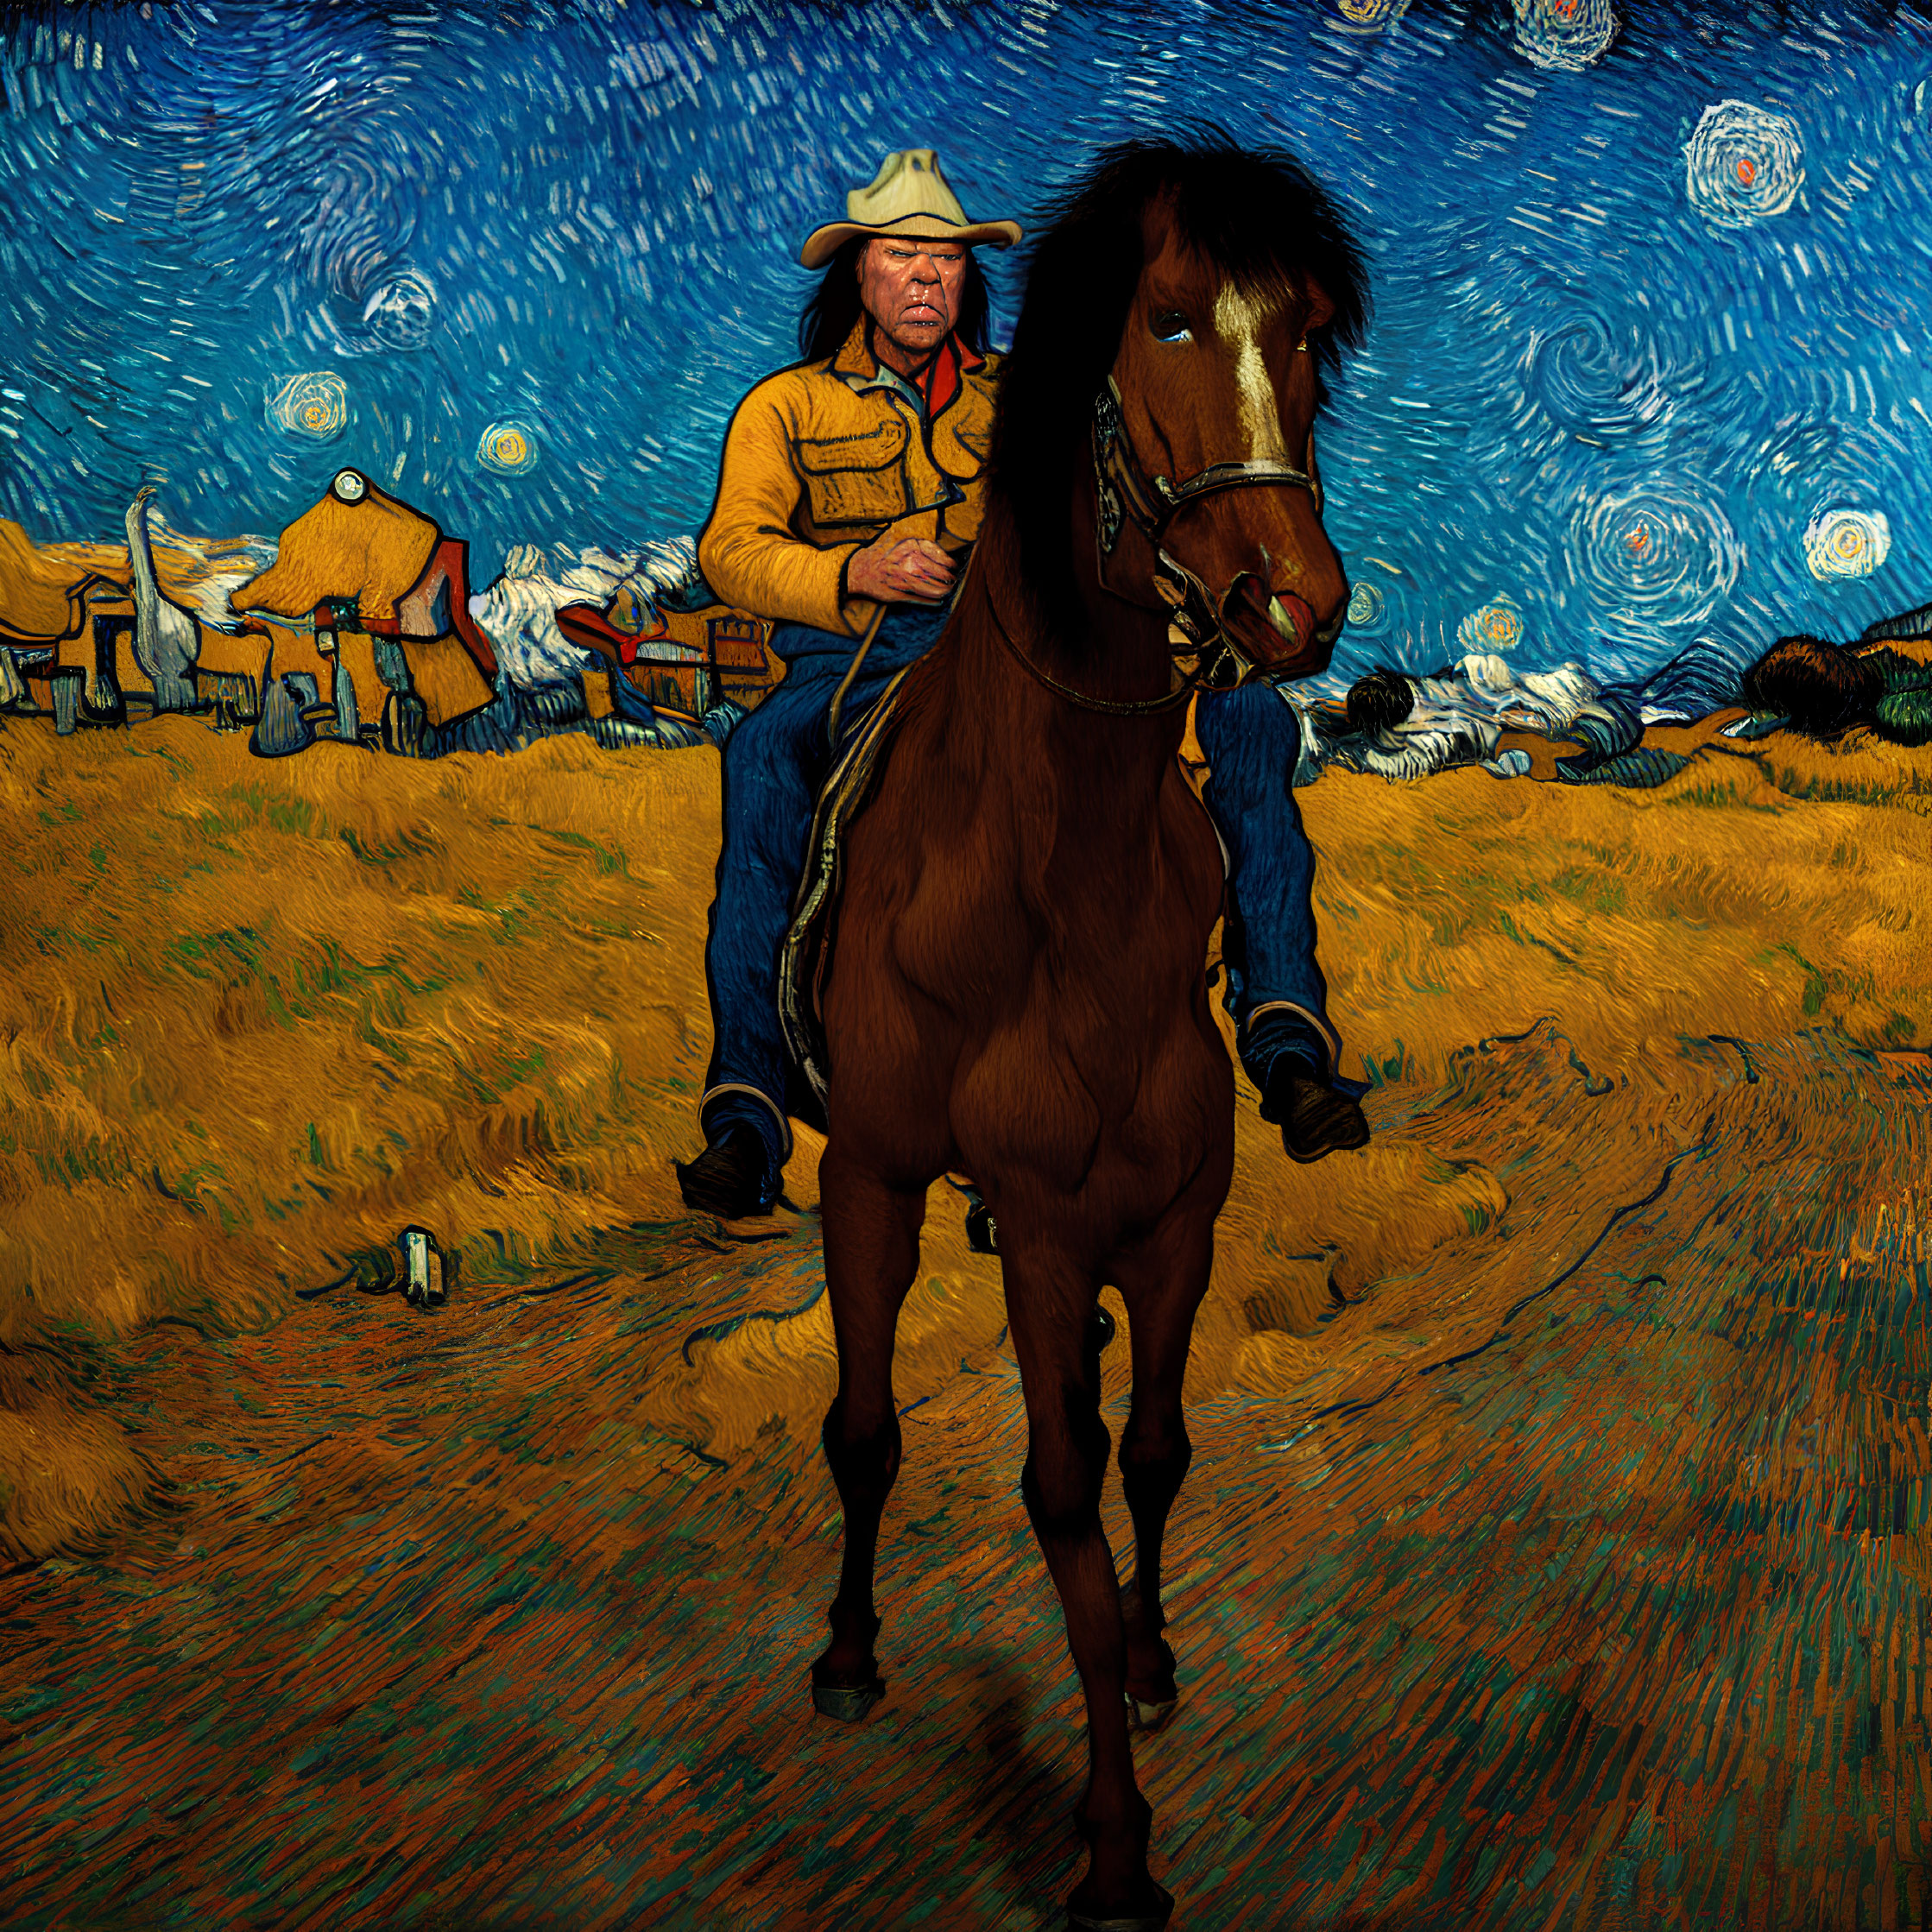 Cowboy on Horse in Van Gogh-style Starry Night Landscape